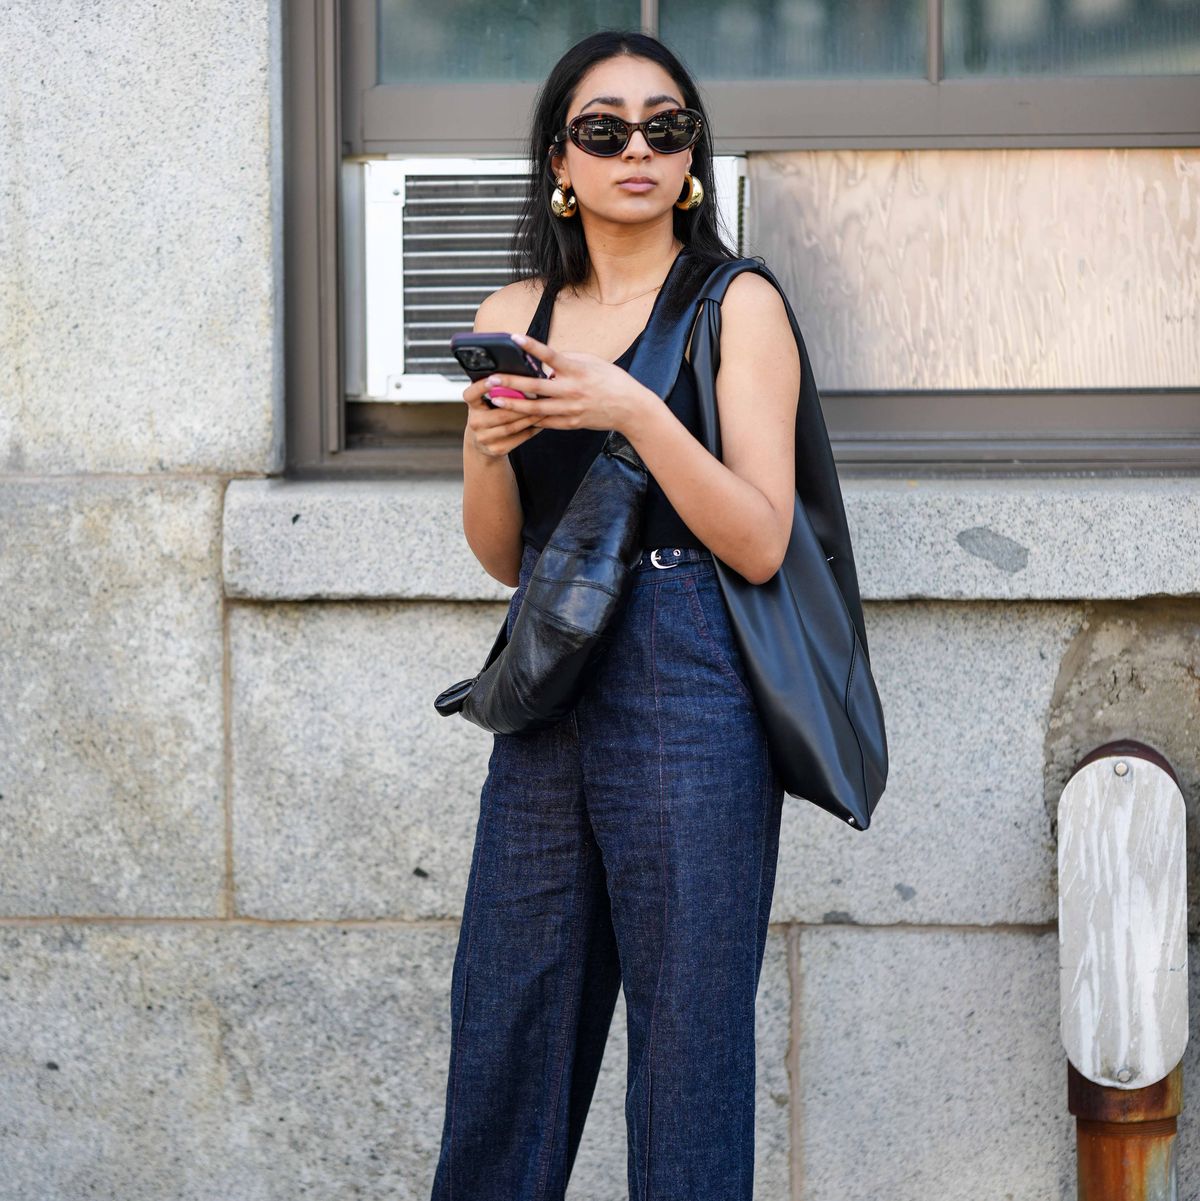 new york, new york september 12 a guest wears sunglasses, a black tank top, blue denim jeans pants, a black leather bag, golden earrings, holds a mobile phone, outside gabriela hearst, during new york fashion week, on september 12, 2023 in new york city photo by edward berthelotgetty images